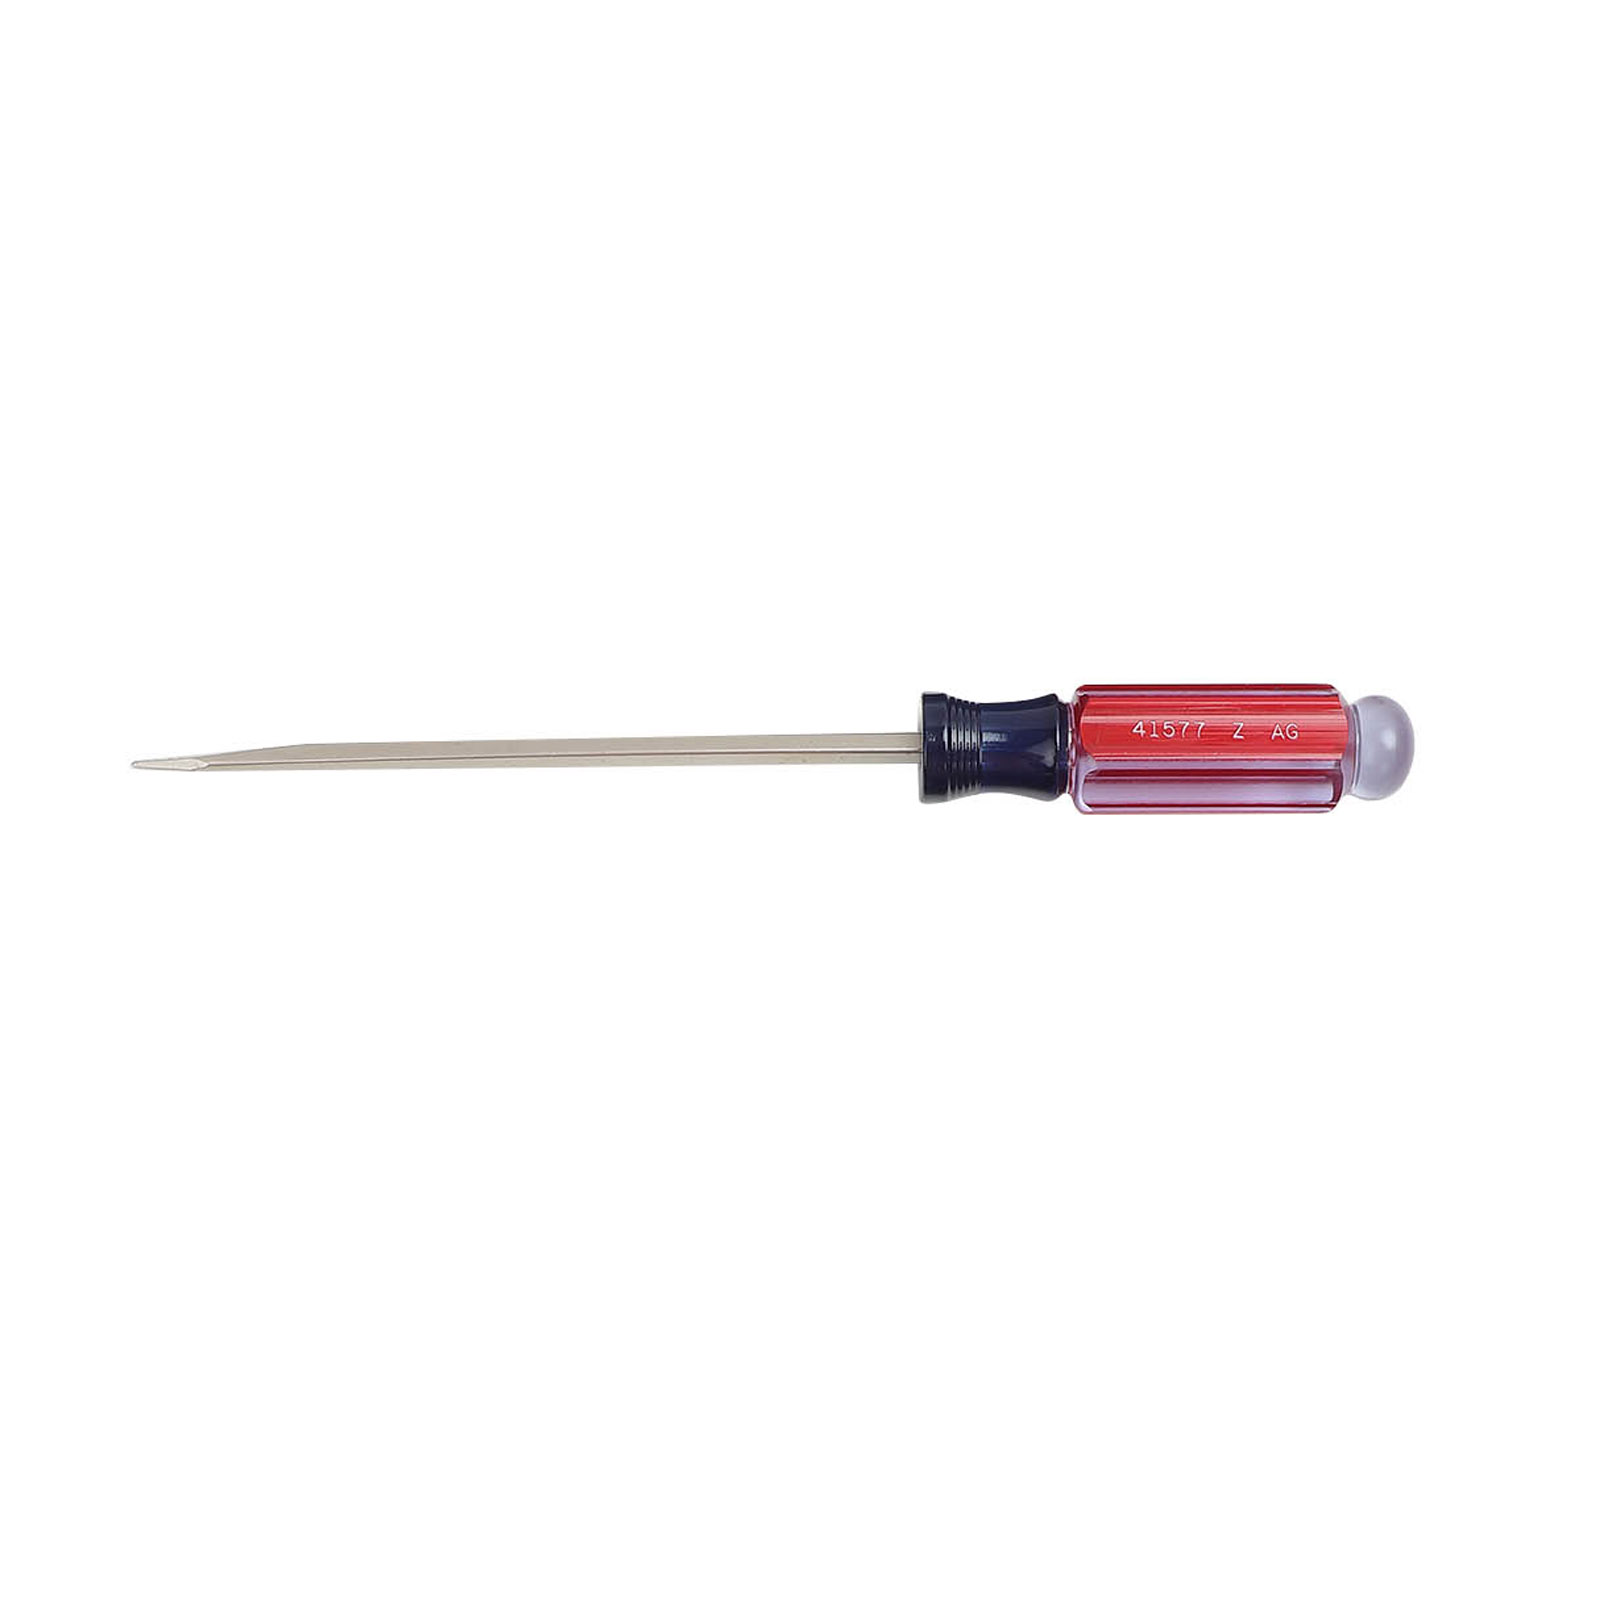 Craftsman  SLOTTED 3/16 x 6 IN SCREWDRIVER